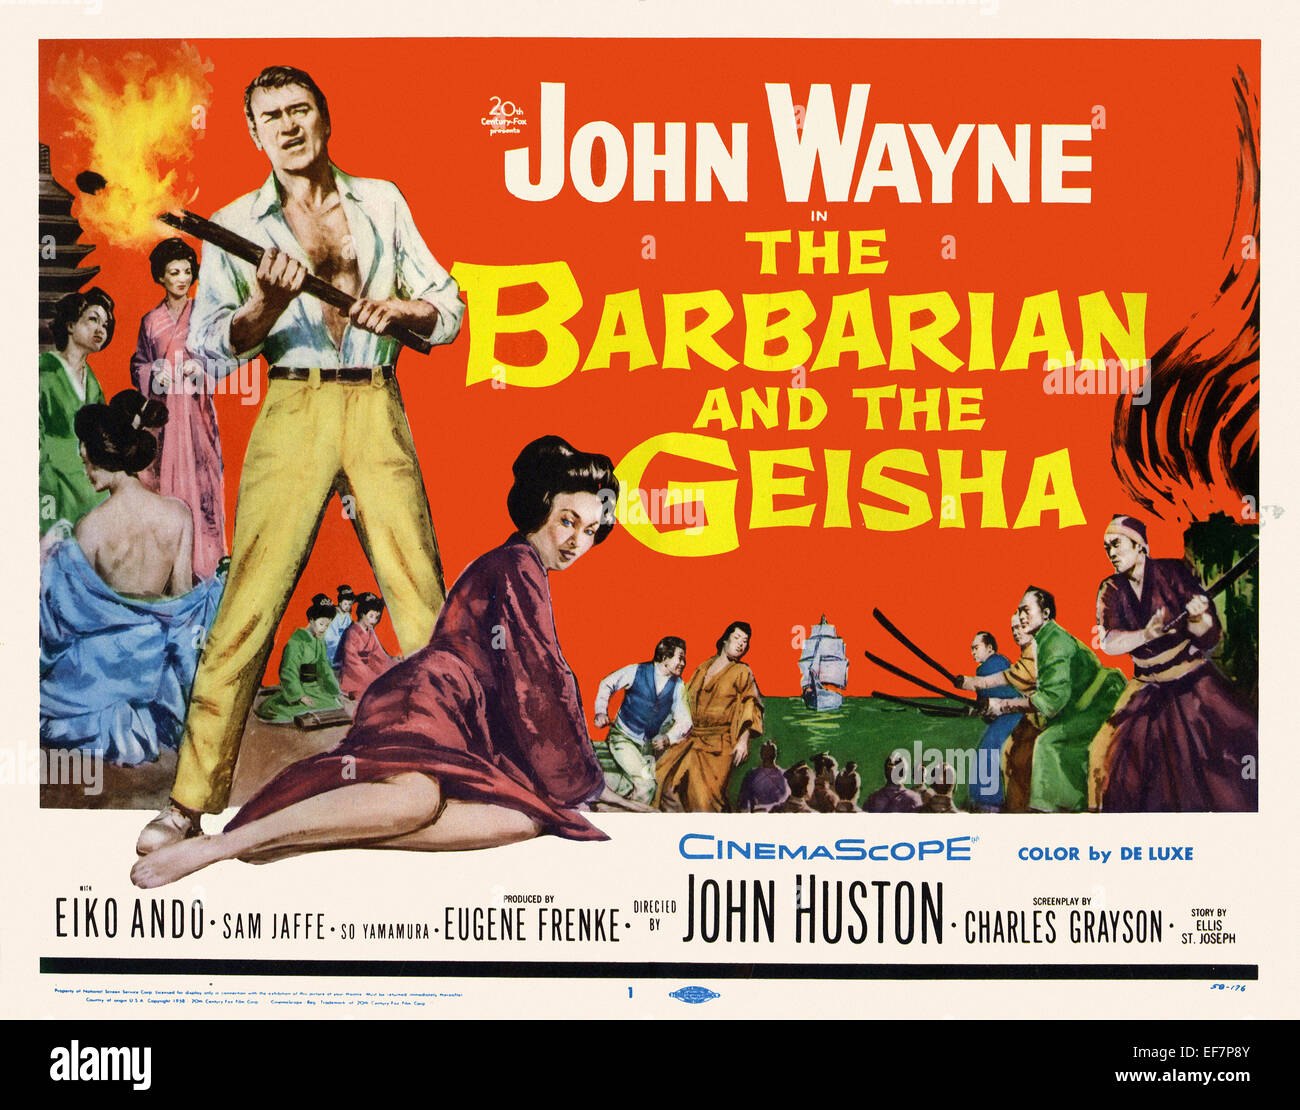 The Barbarian and the Geisha - Movie Poster - Movie Poster Stock Photo